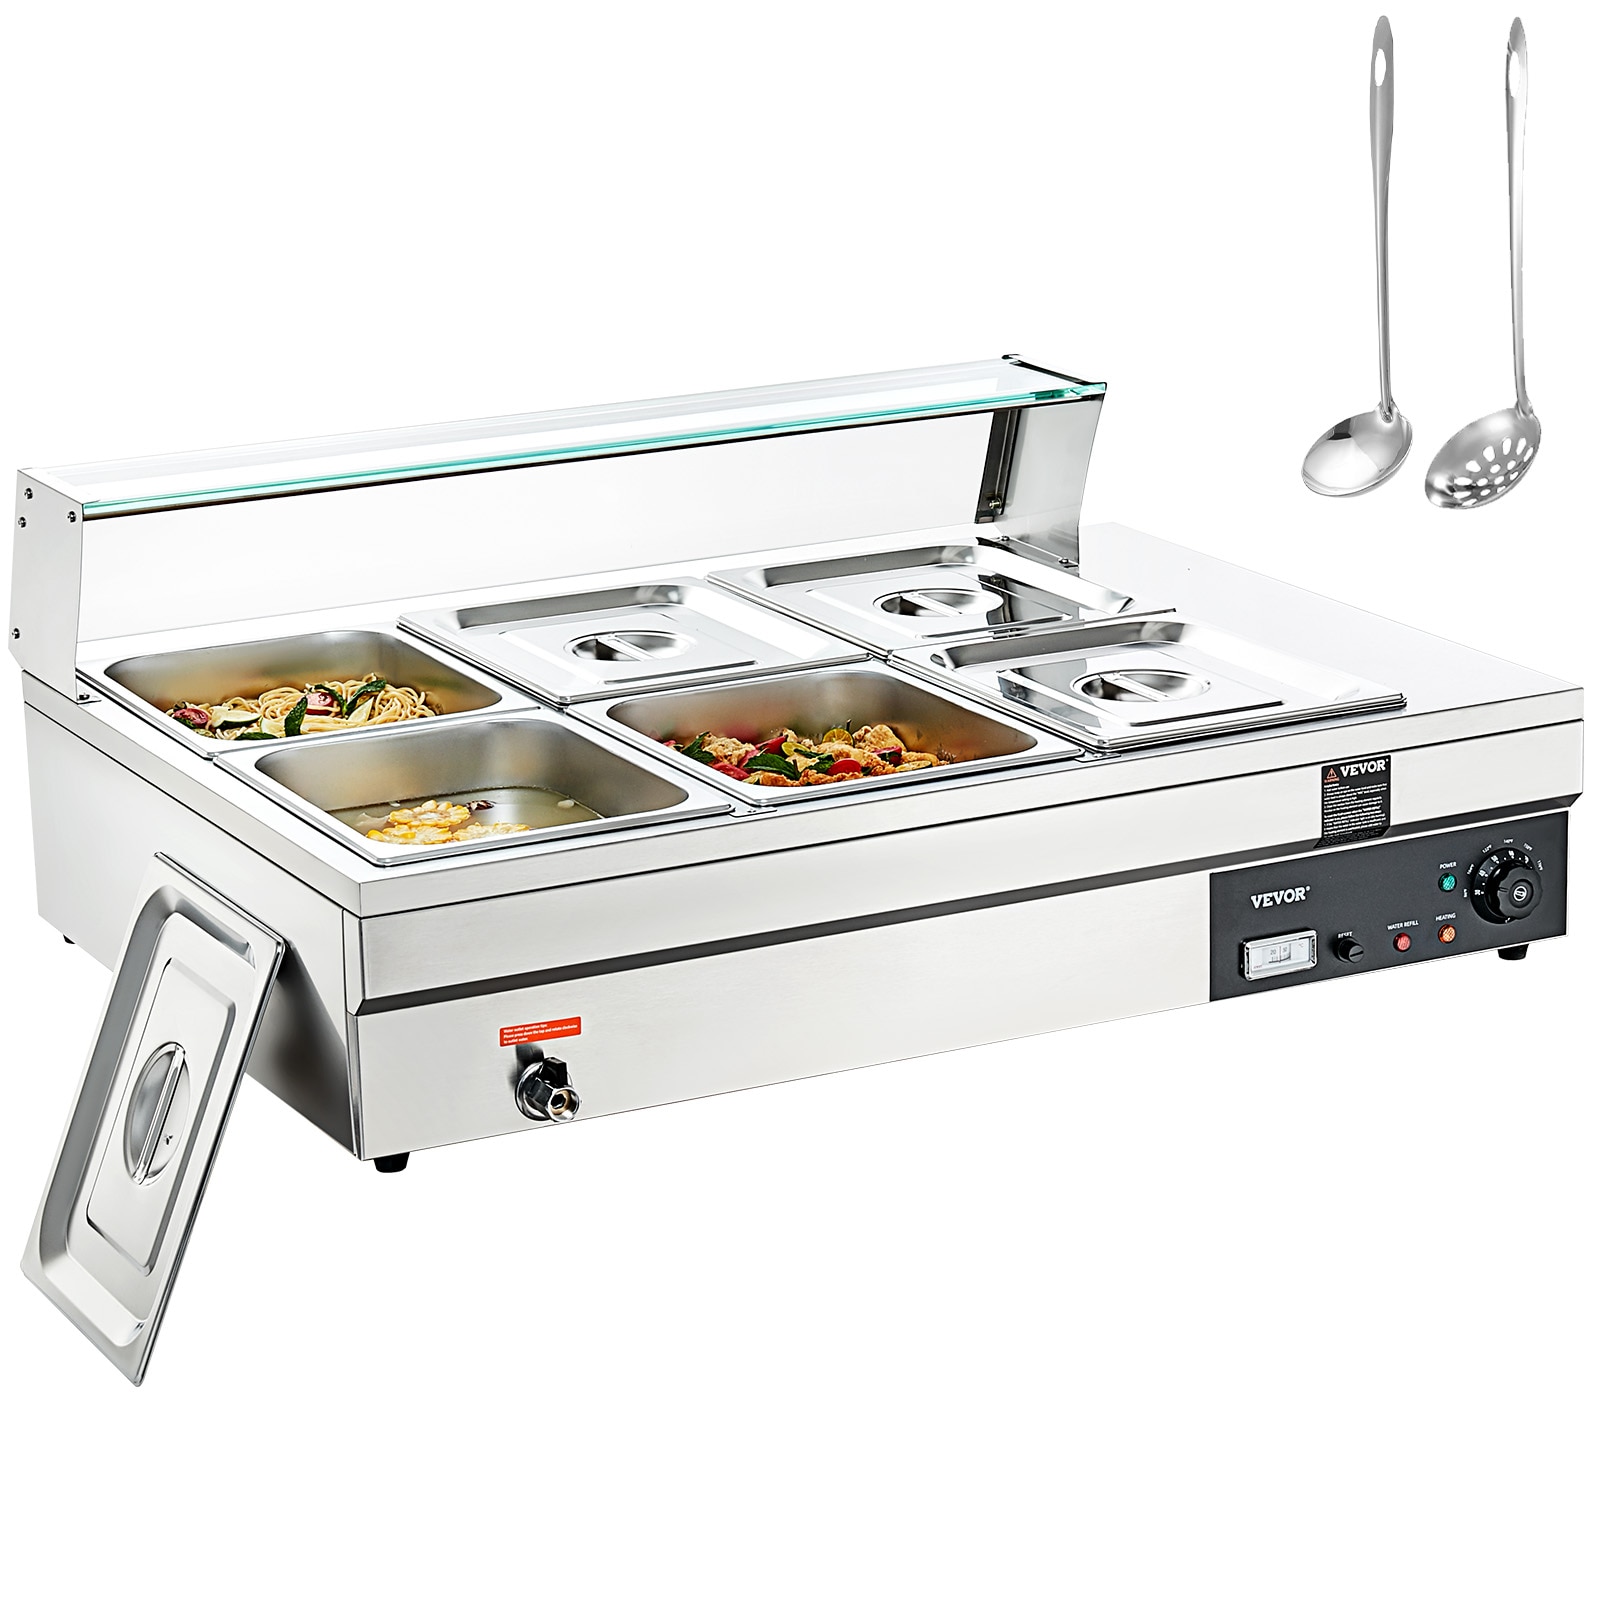 VEVOR Electric Buffet Server and Food Warmer, 25.6 in. x 15 in